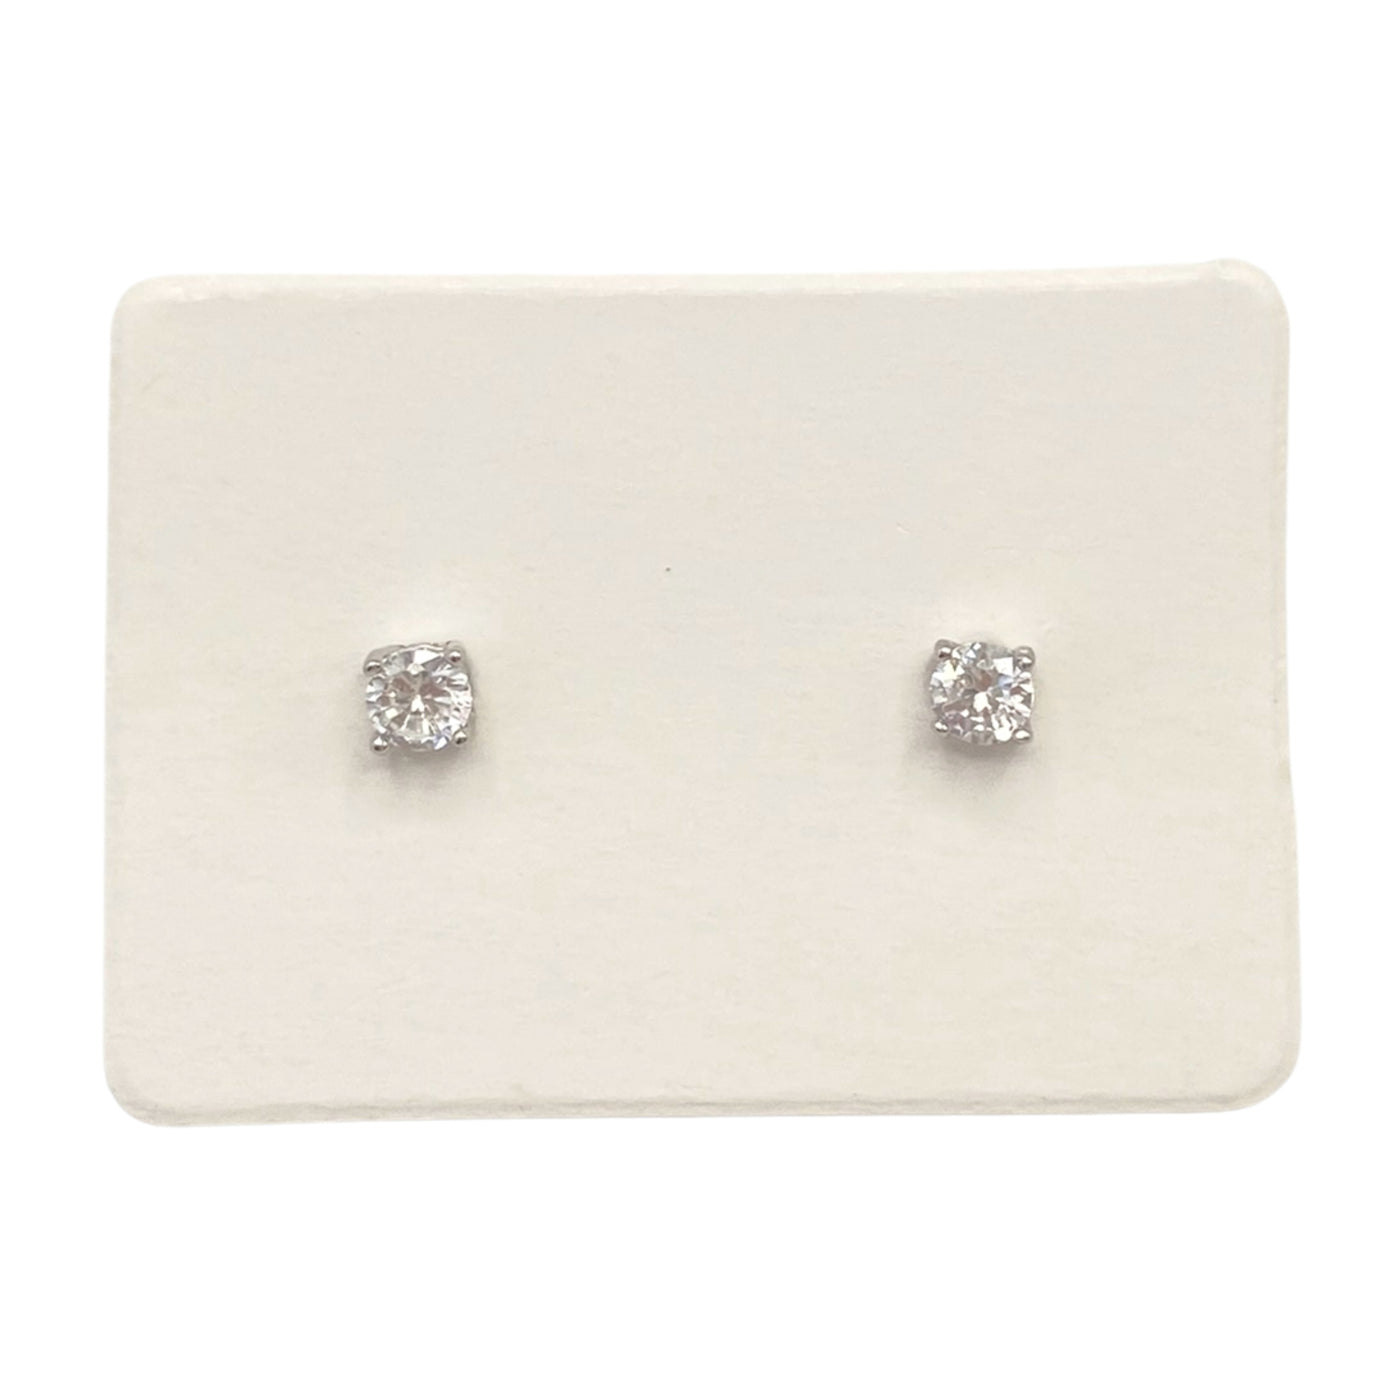 Pack of 5 silver white round earrings - 3 mm